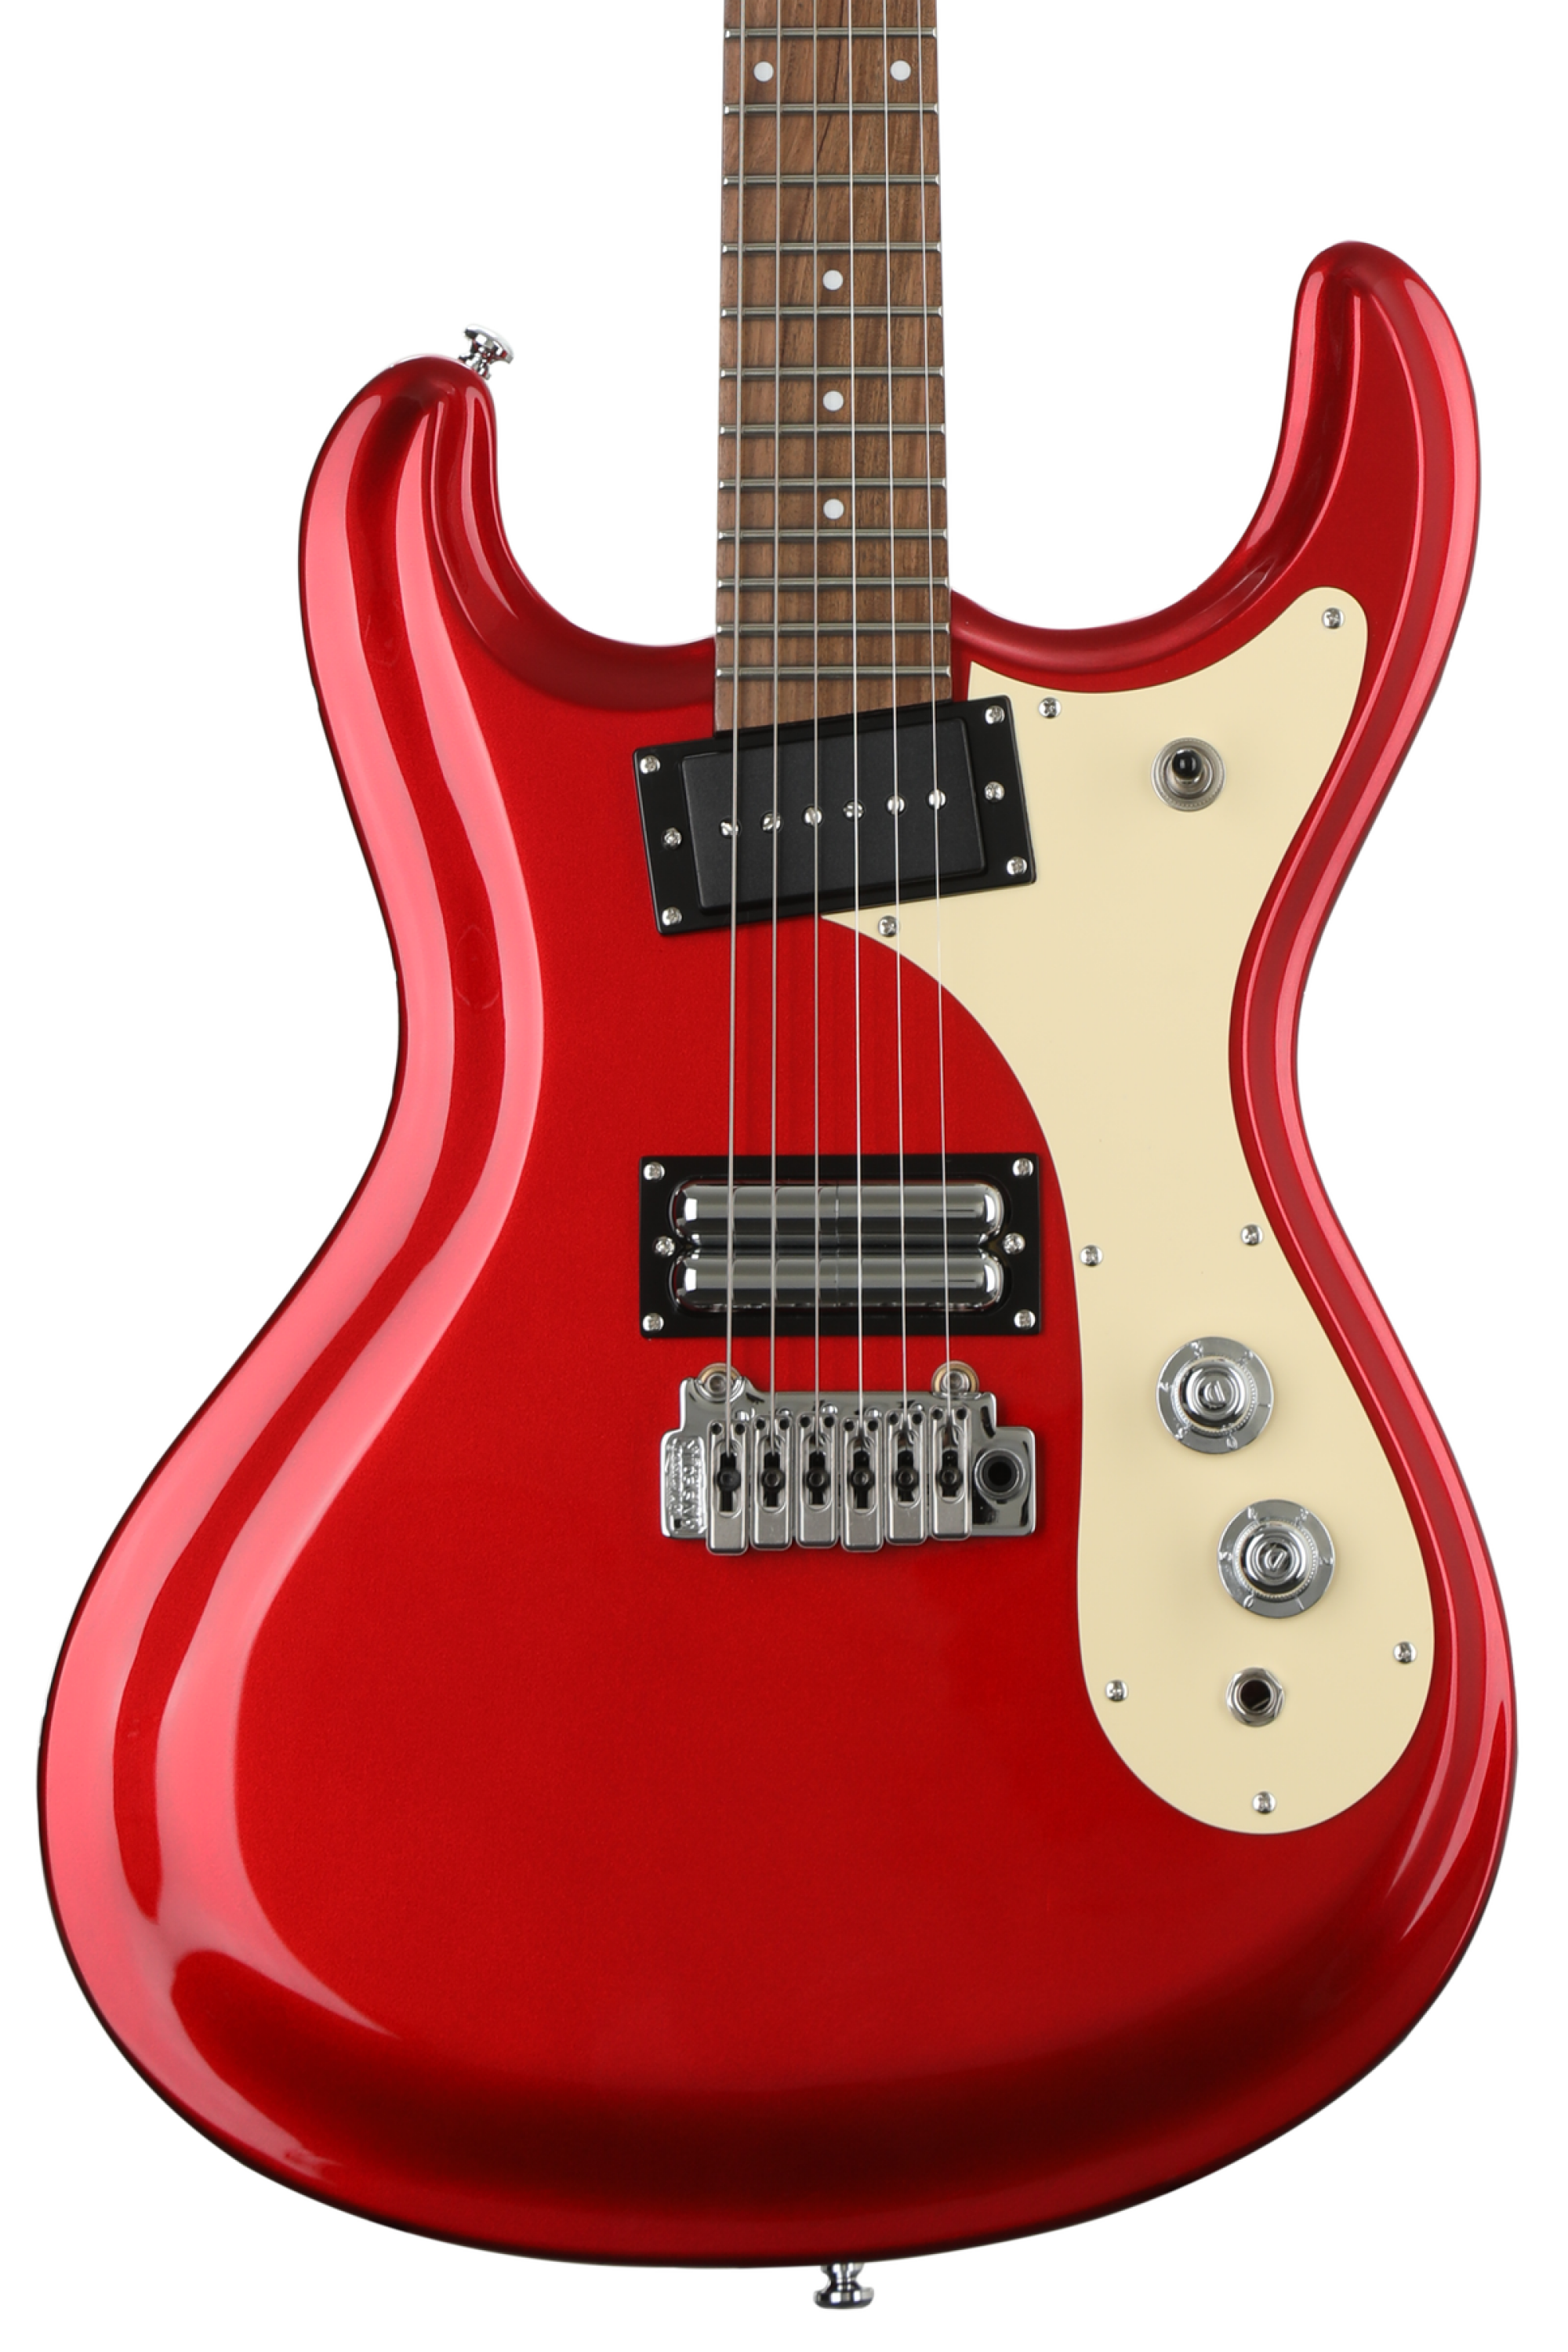 Danelectro The 64 Electric Guitar - Red Metallic | Sweetwater